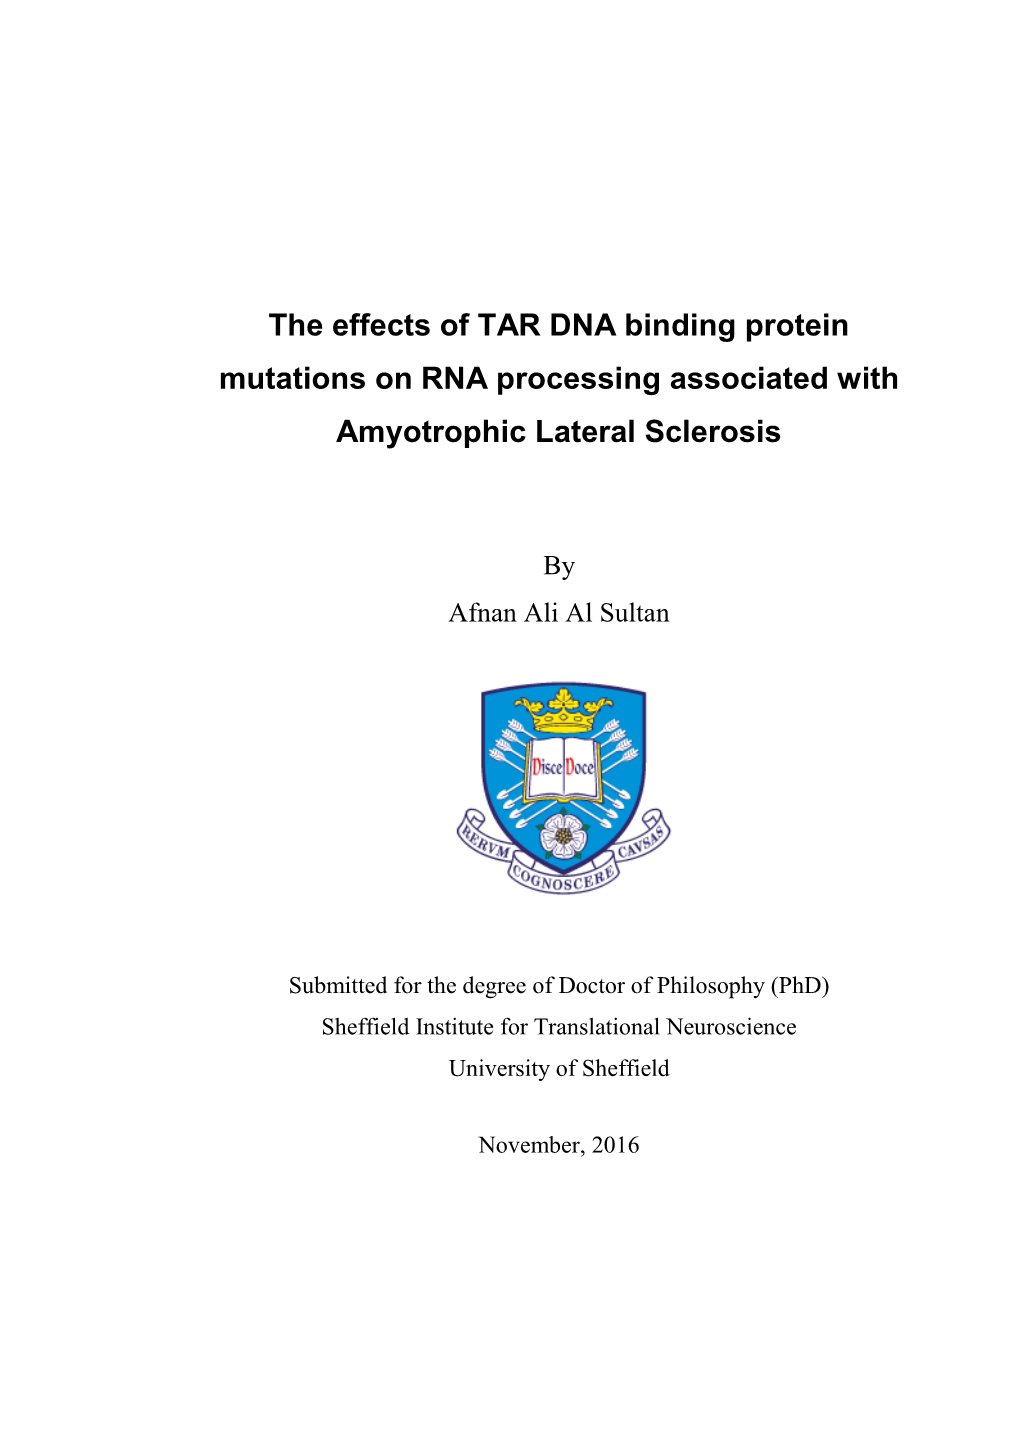 The Effects of TAR DNA Binding Protein Mutations on RNA Processing Associated with Amyotrophic Lateral Sclerosis